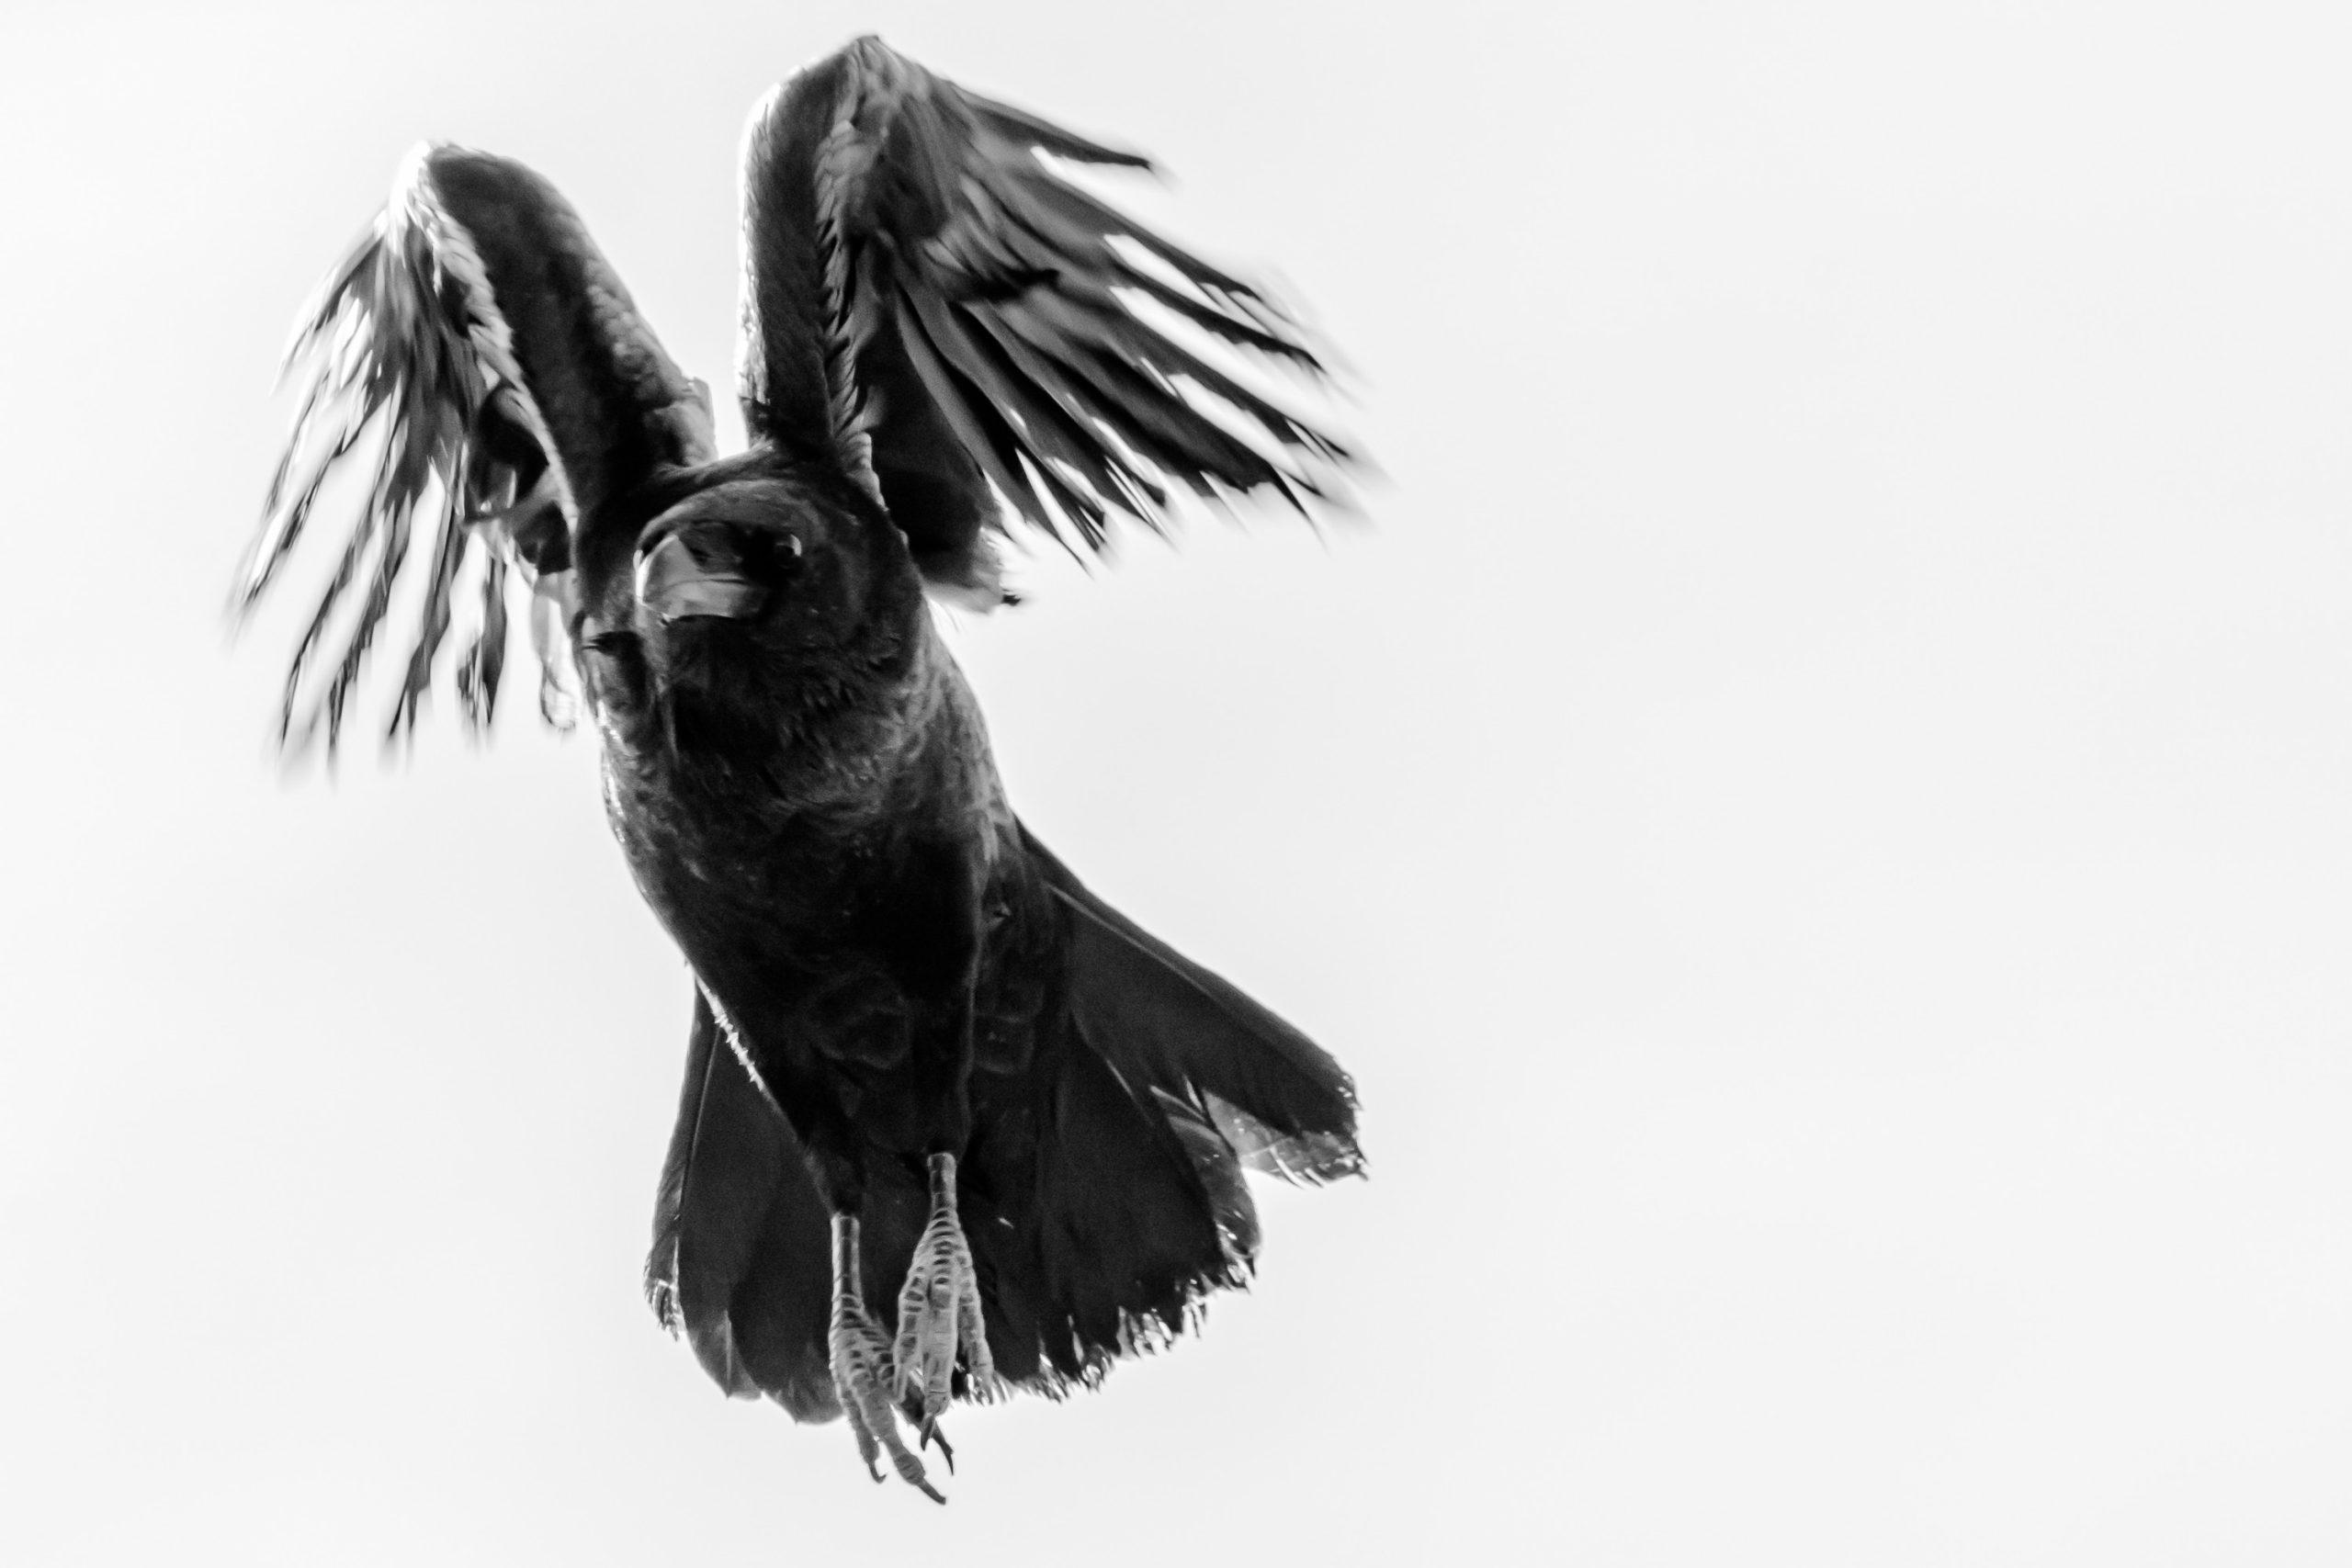 Black and White Bird Wallpapers - Top Free Black and White Bird